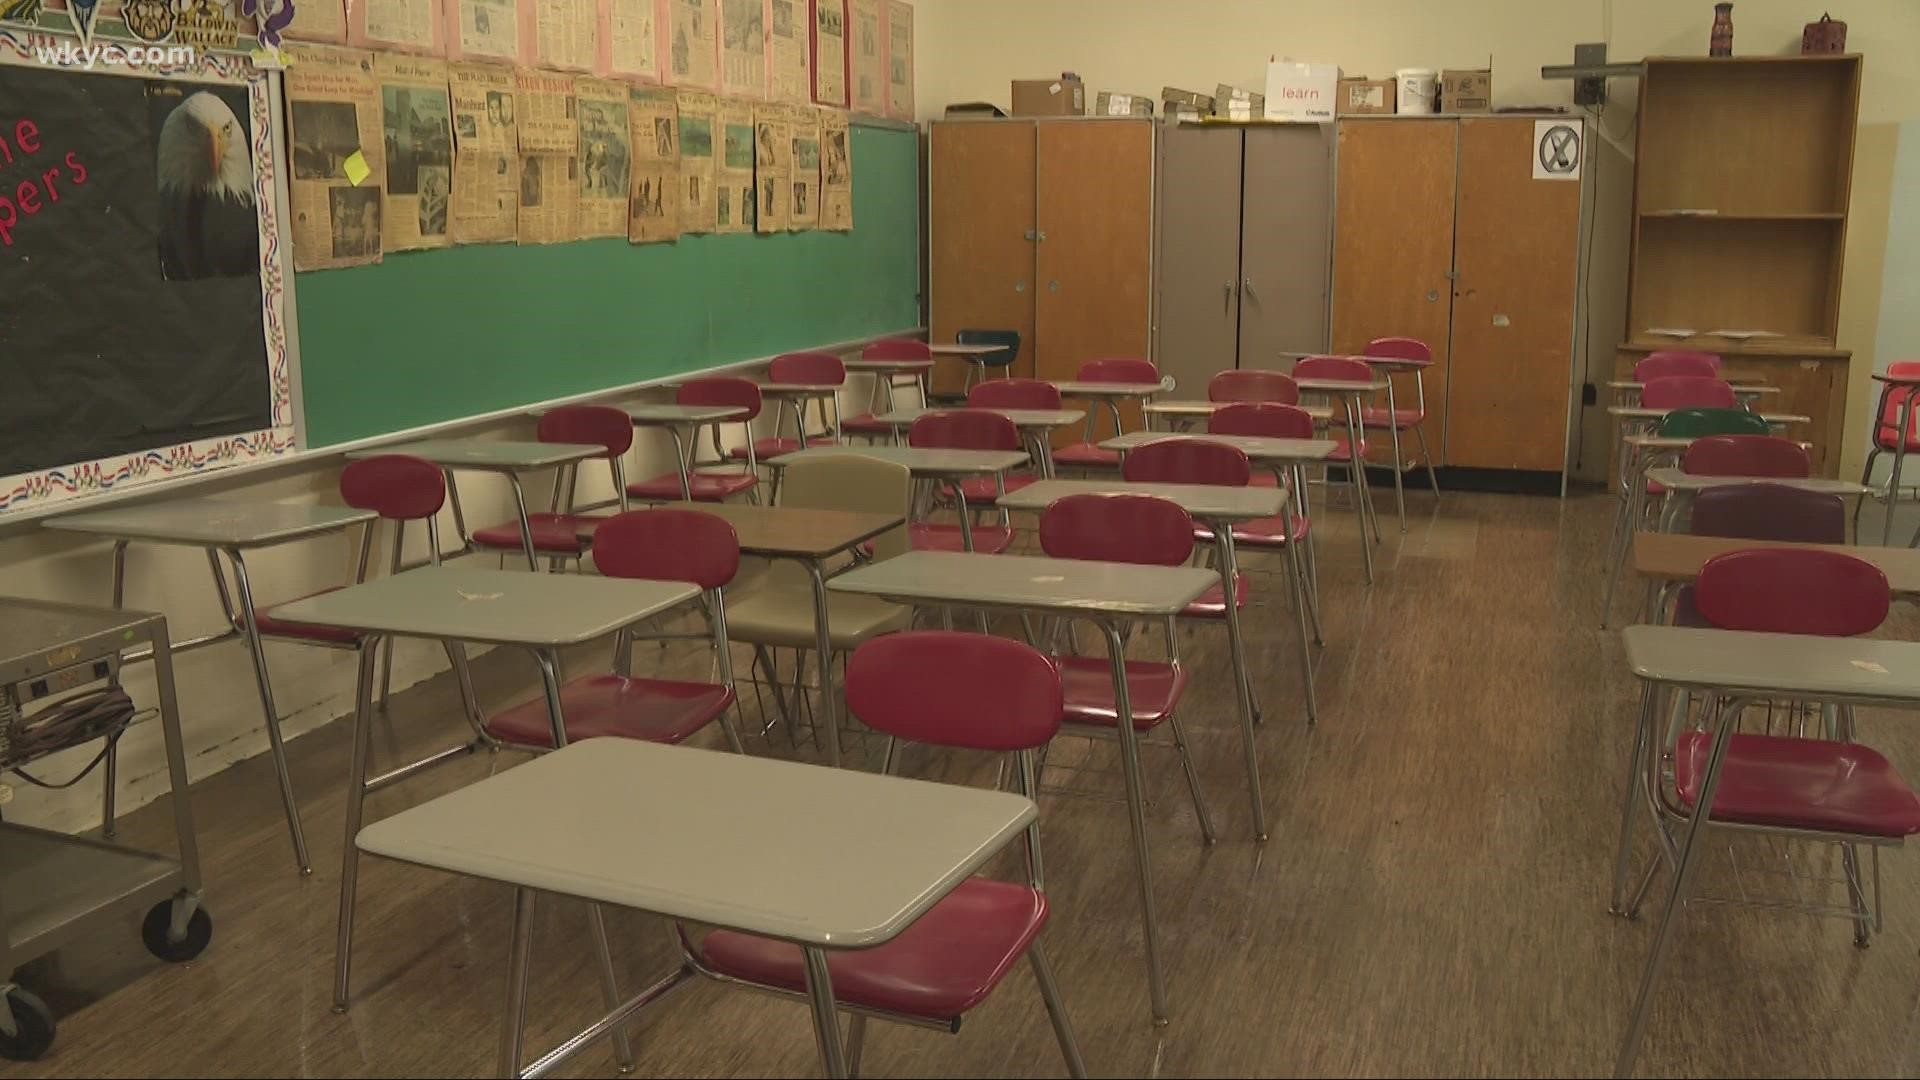 Despite coronavirus being a major worry for some educators, many are worried about students' mental health and safety. 3News' Rachel Polansky reports.